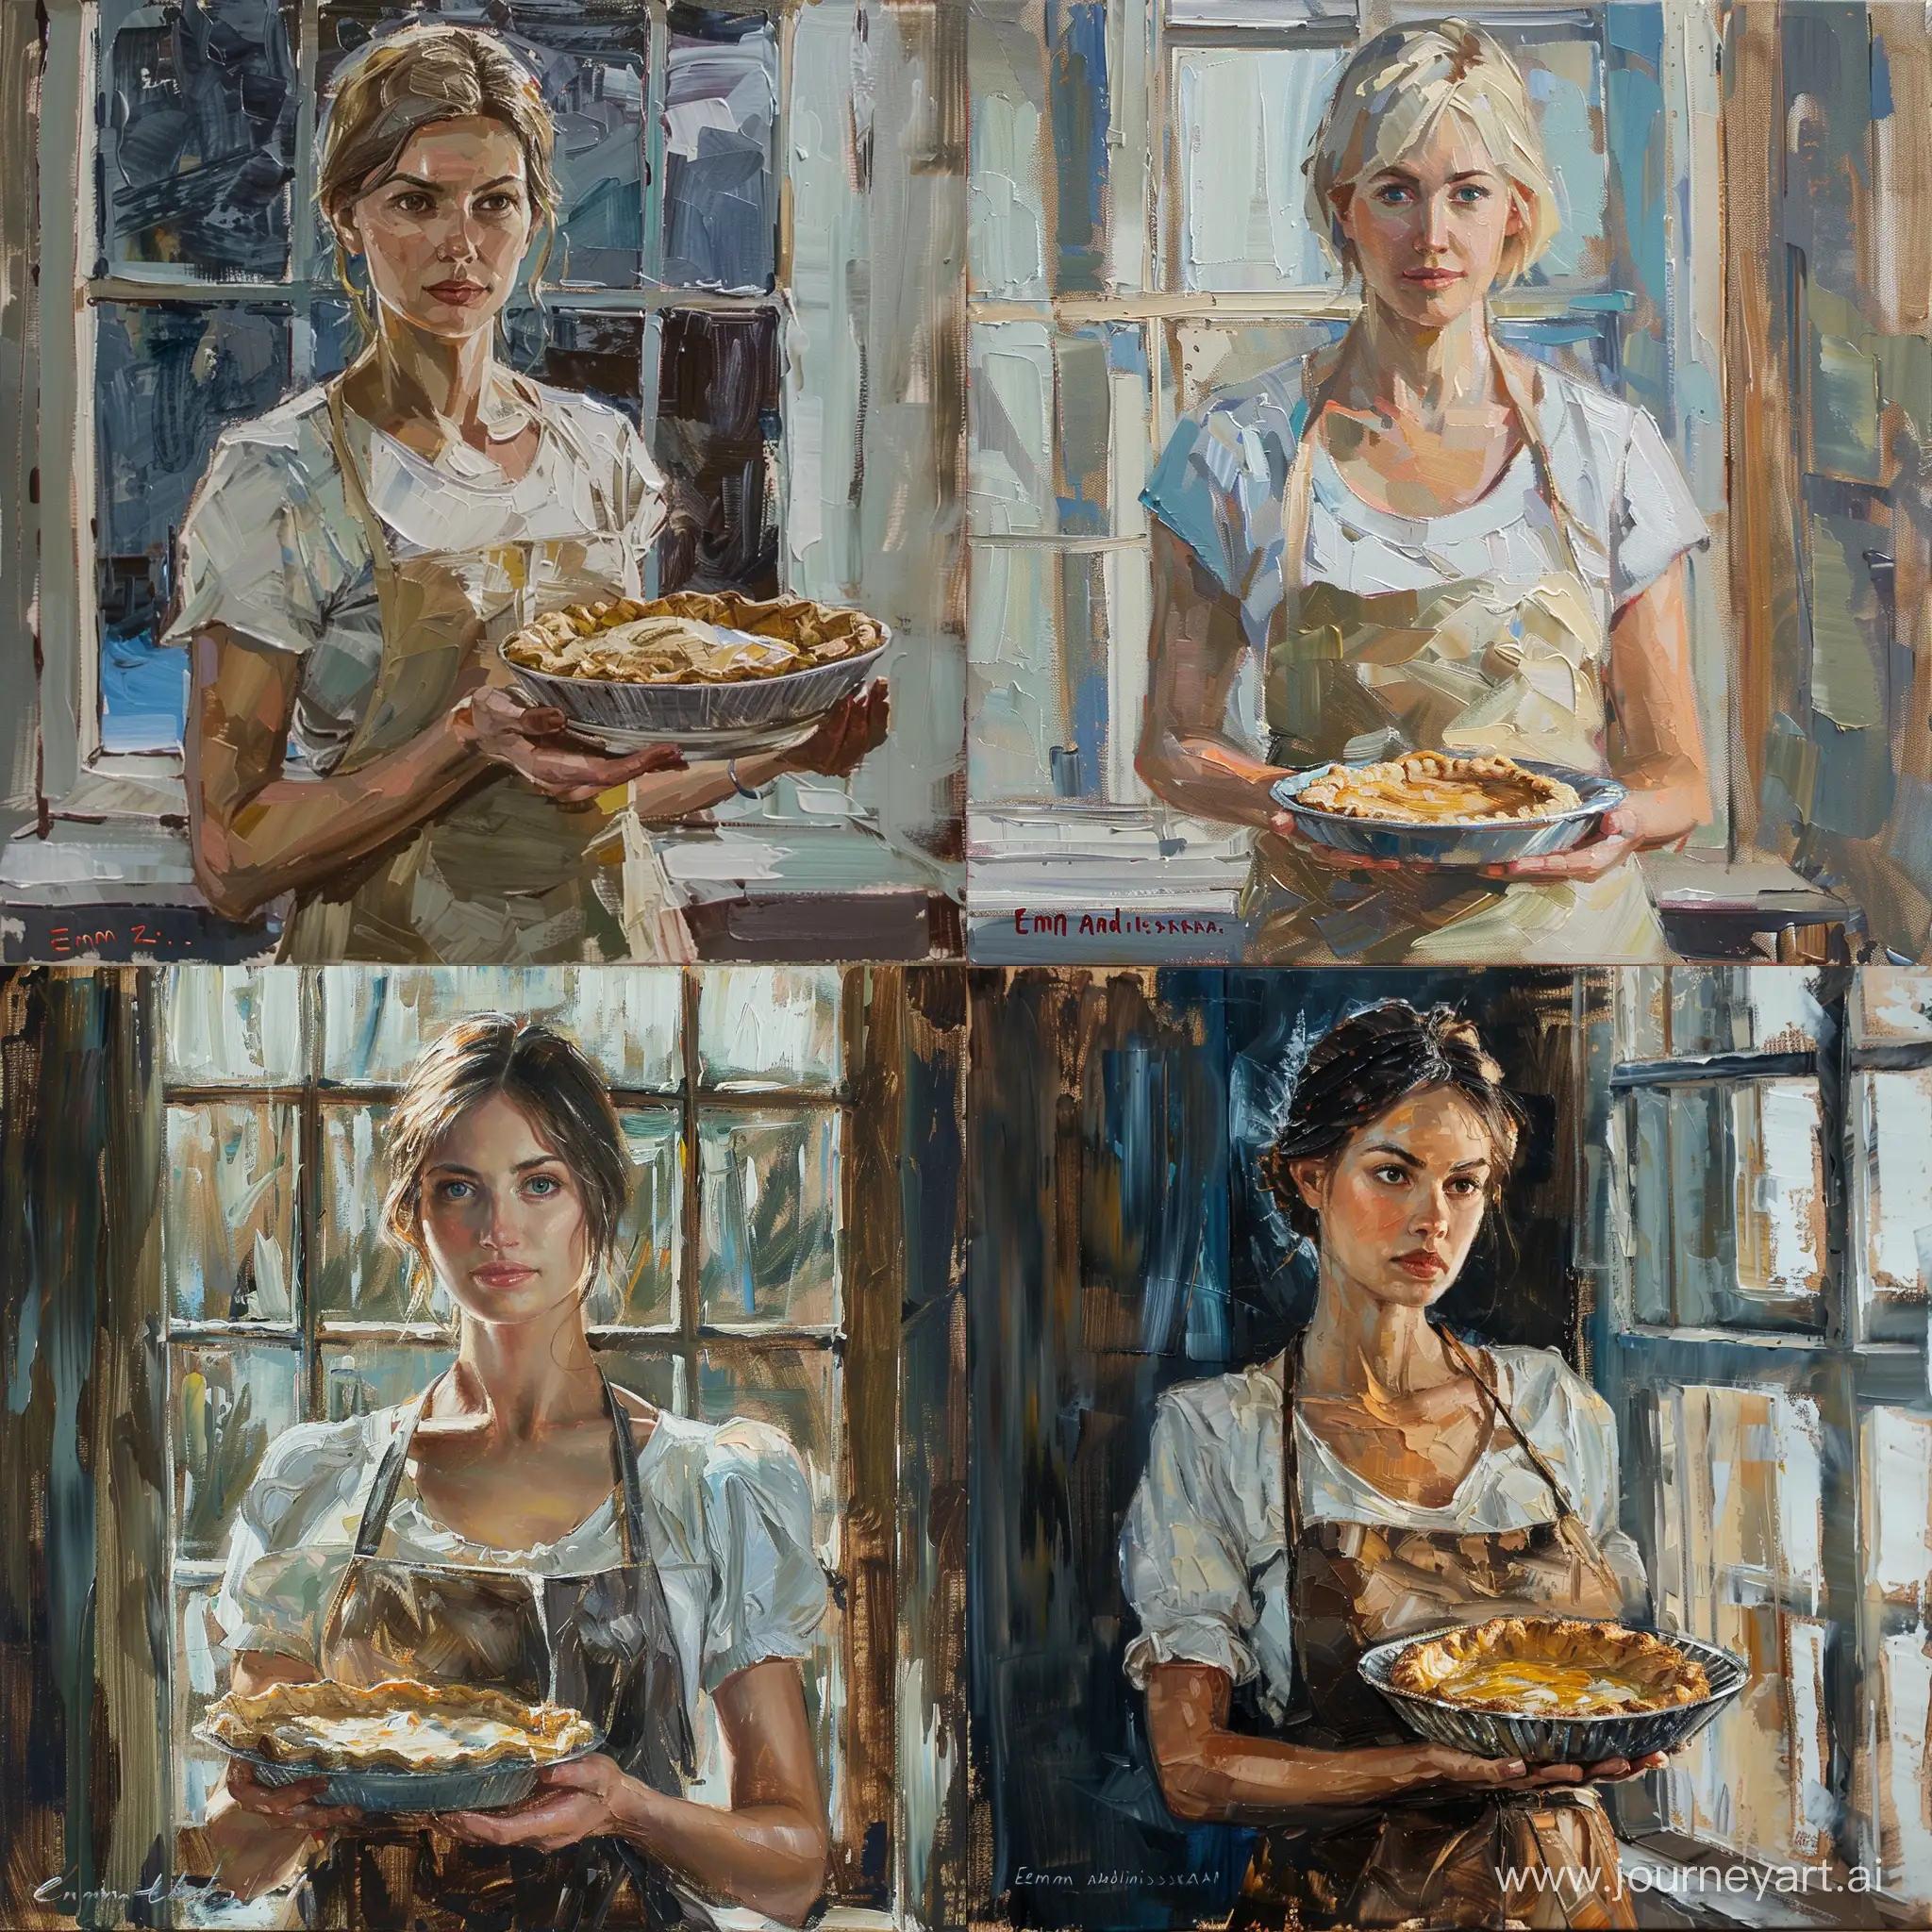 Rustic-Oil-Painting-Portrait-of-a-White-Woman-Holding-Pie-by-Emma-Andievskaya